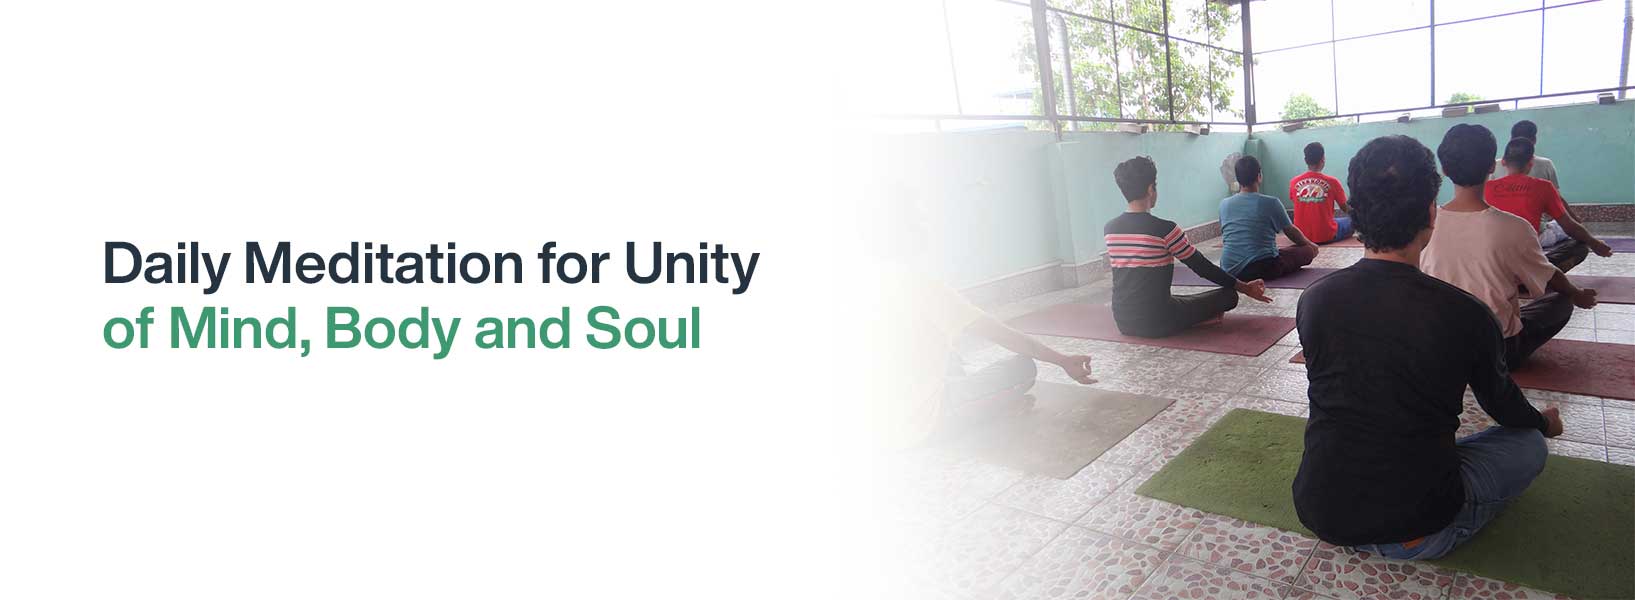 Daily Meditation for unity of Mind, Body and Soul